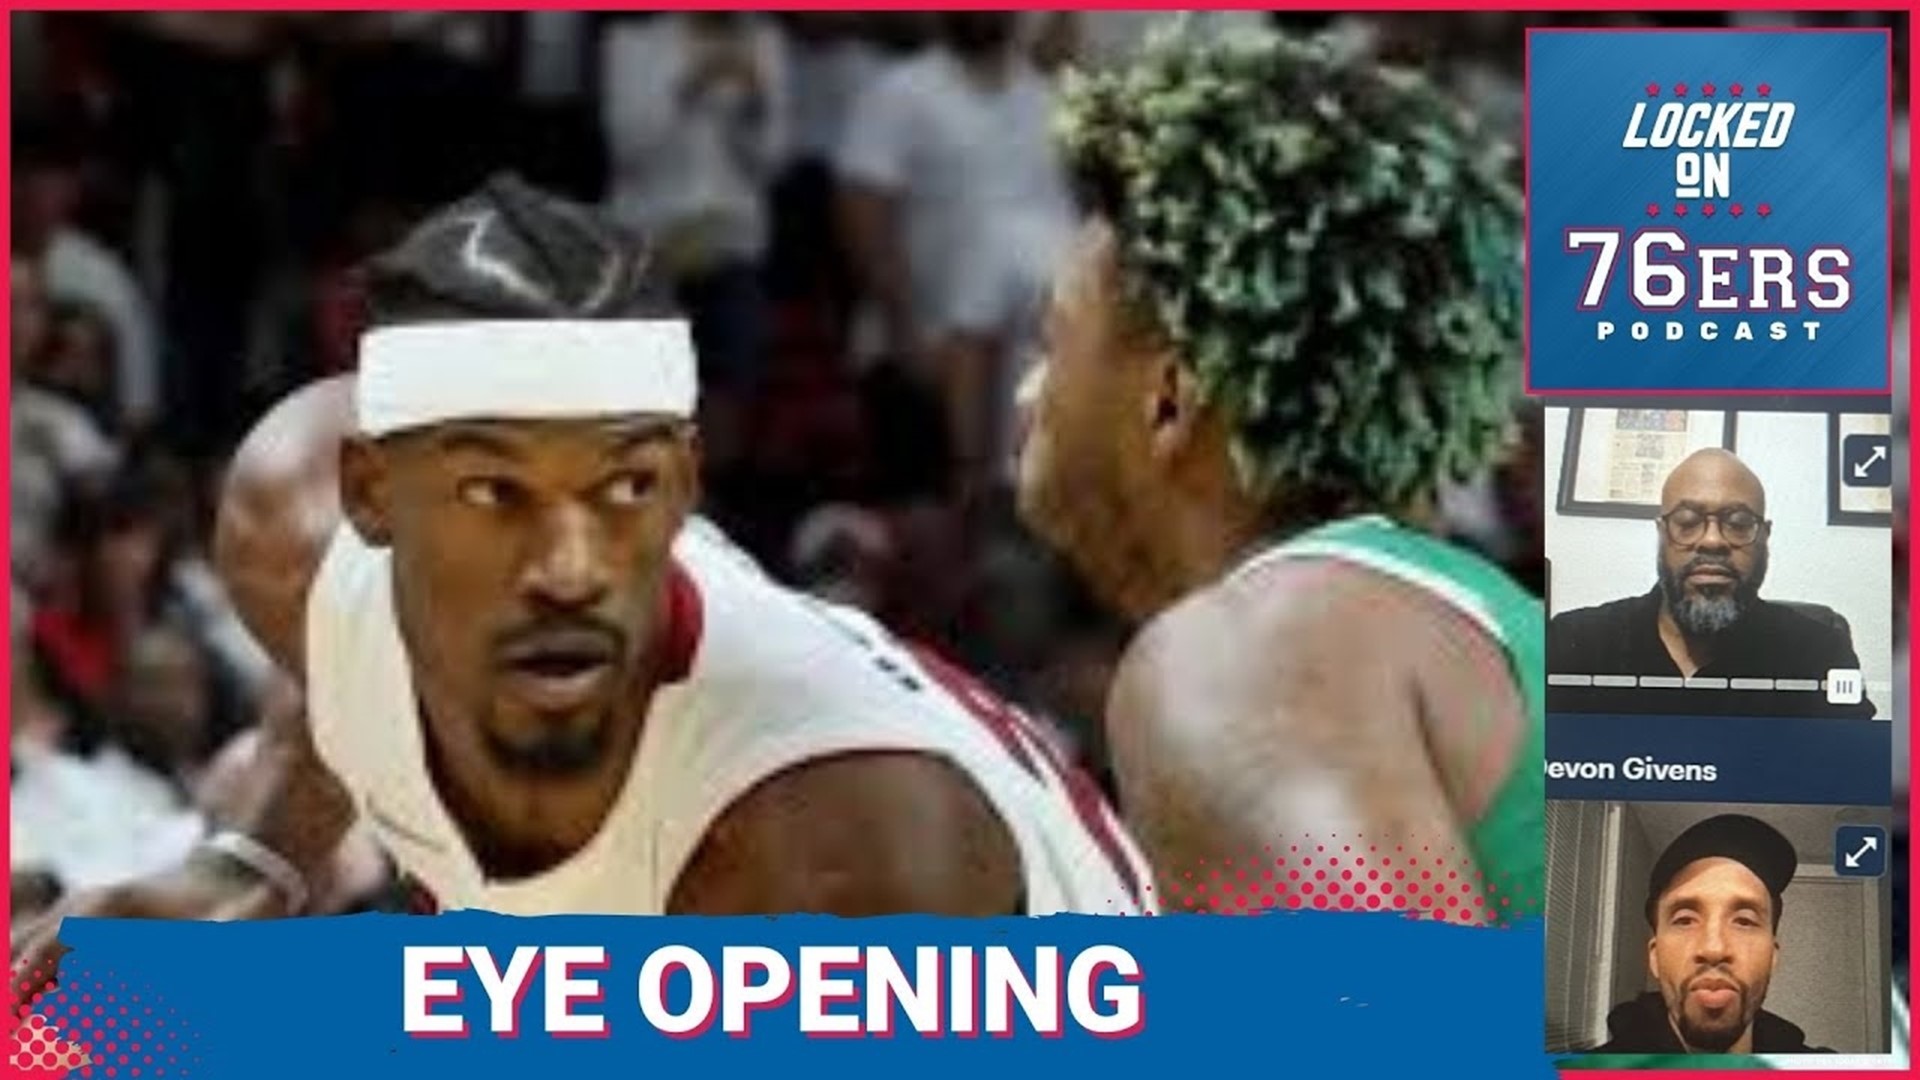 The Miami Heat are dominating the Boston Celtics in the Eastern Conference finals. Devon Givens and Keith Pompey dissect what this says about the Sixers